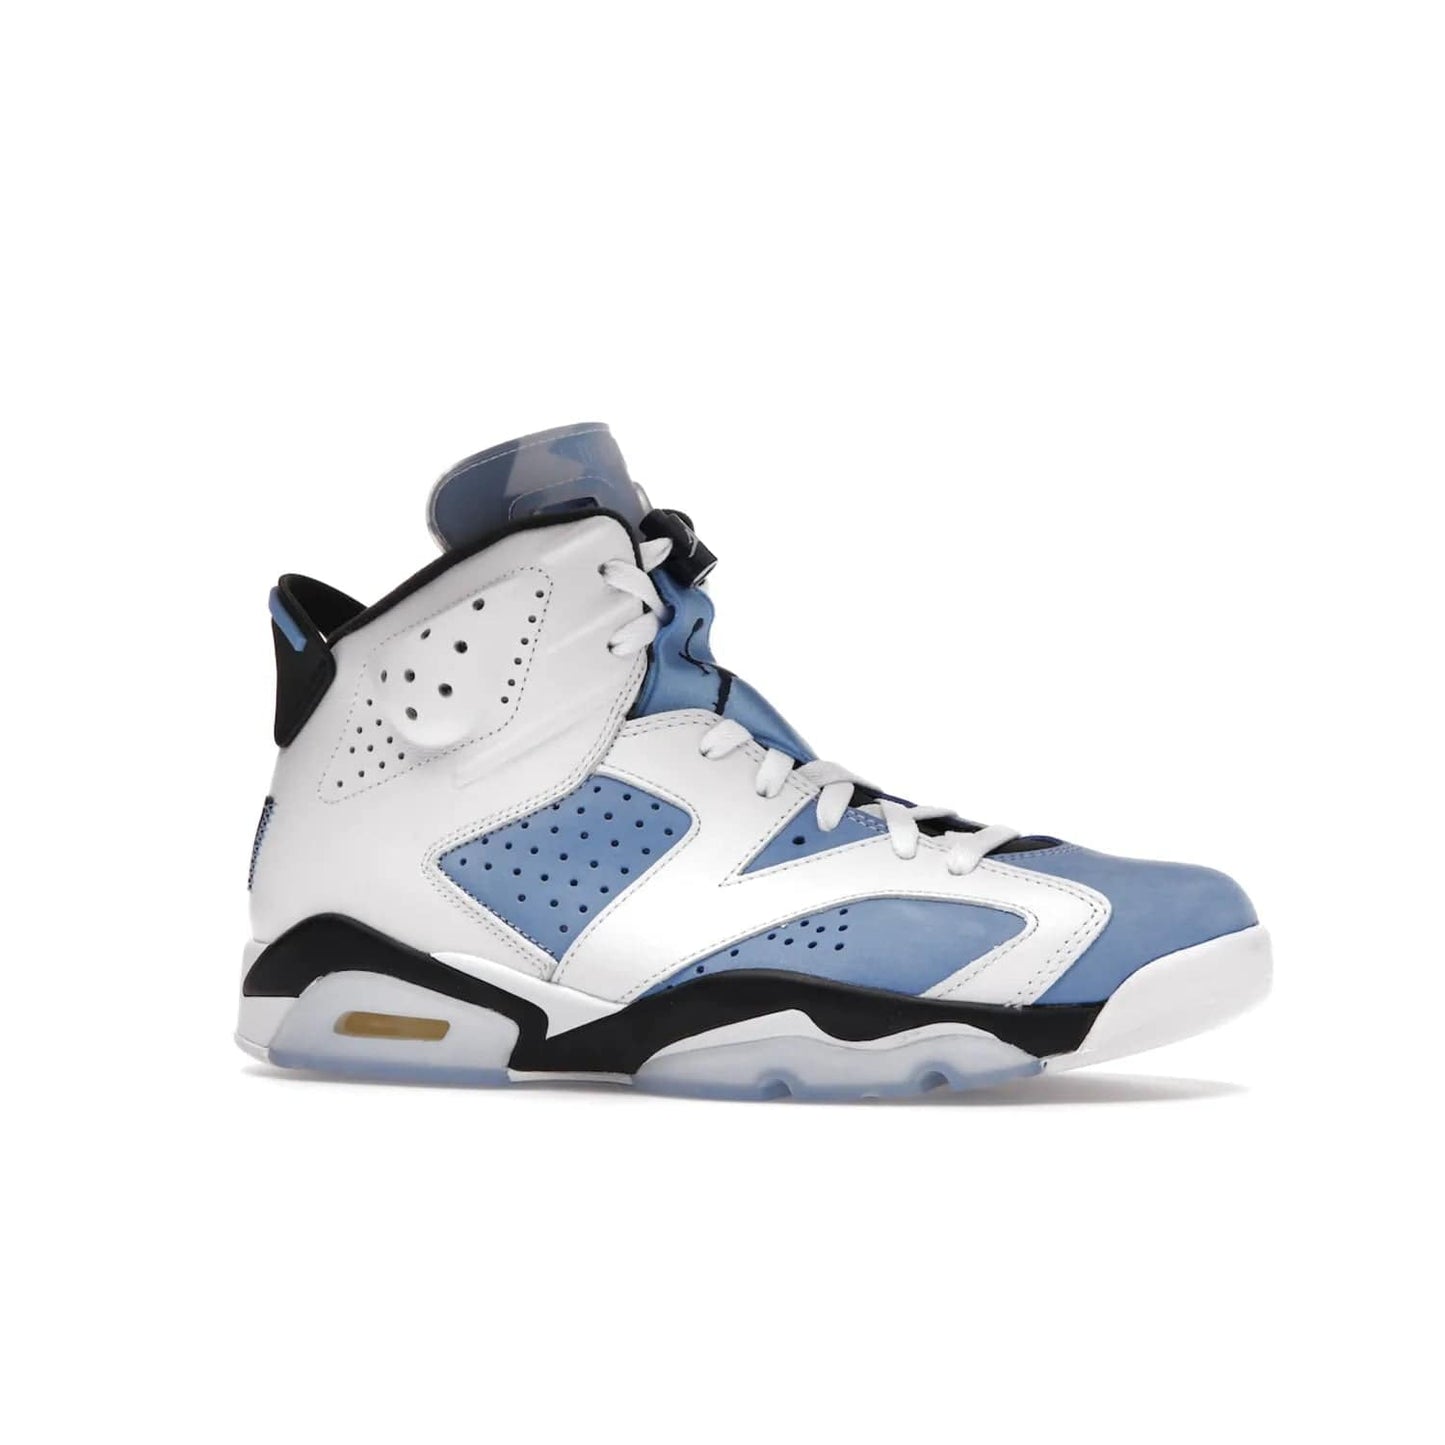 Jordan 6 Retro UNC White - Image 3 - Only at www.BallersClubKickz.com - Air Jordan 6 Retro UNC White with classic UNC colors brings nostalgia and style to a legendary silhouette. Celebrate MJ's alma mater with navy blue accents, icy semi-translucent sole and Jordan Team patch. Out March 2022 for the Sneaker Enthusiast.